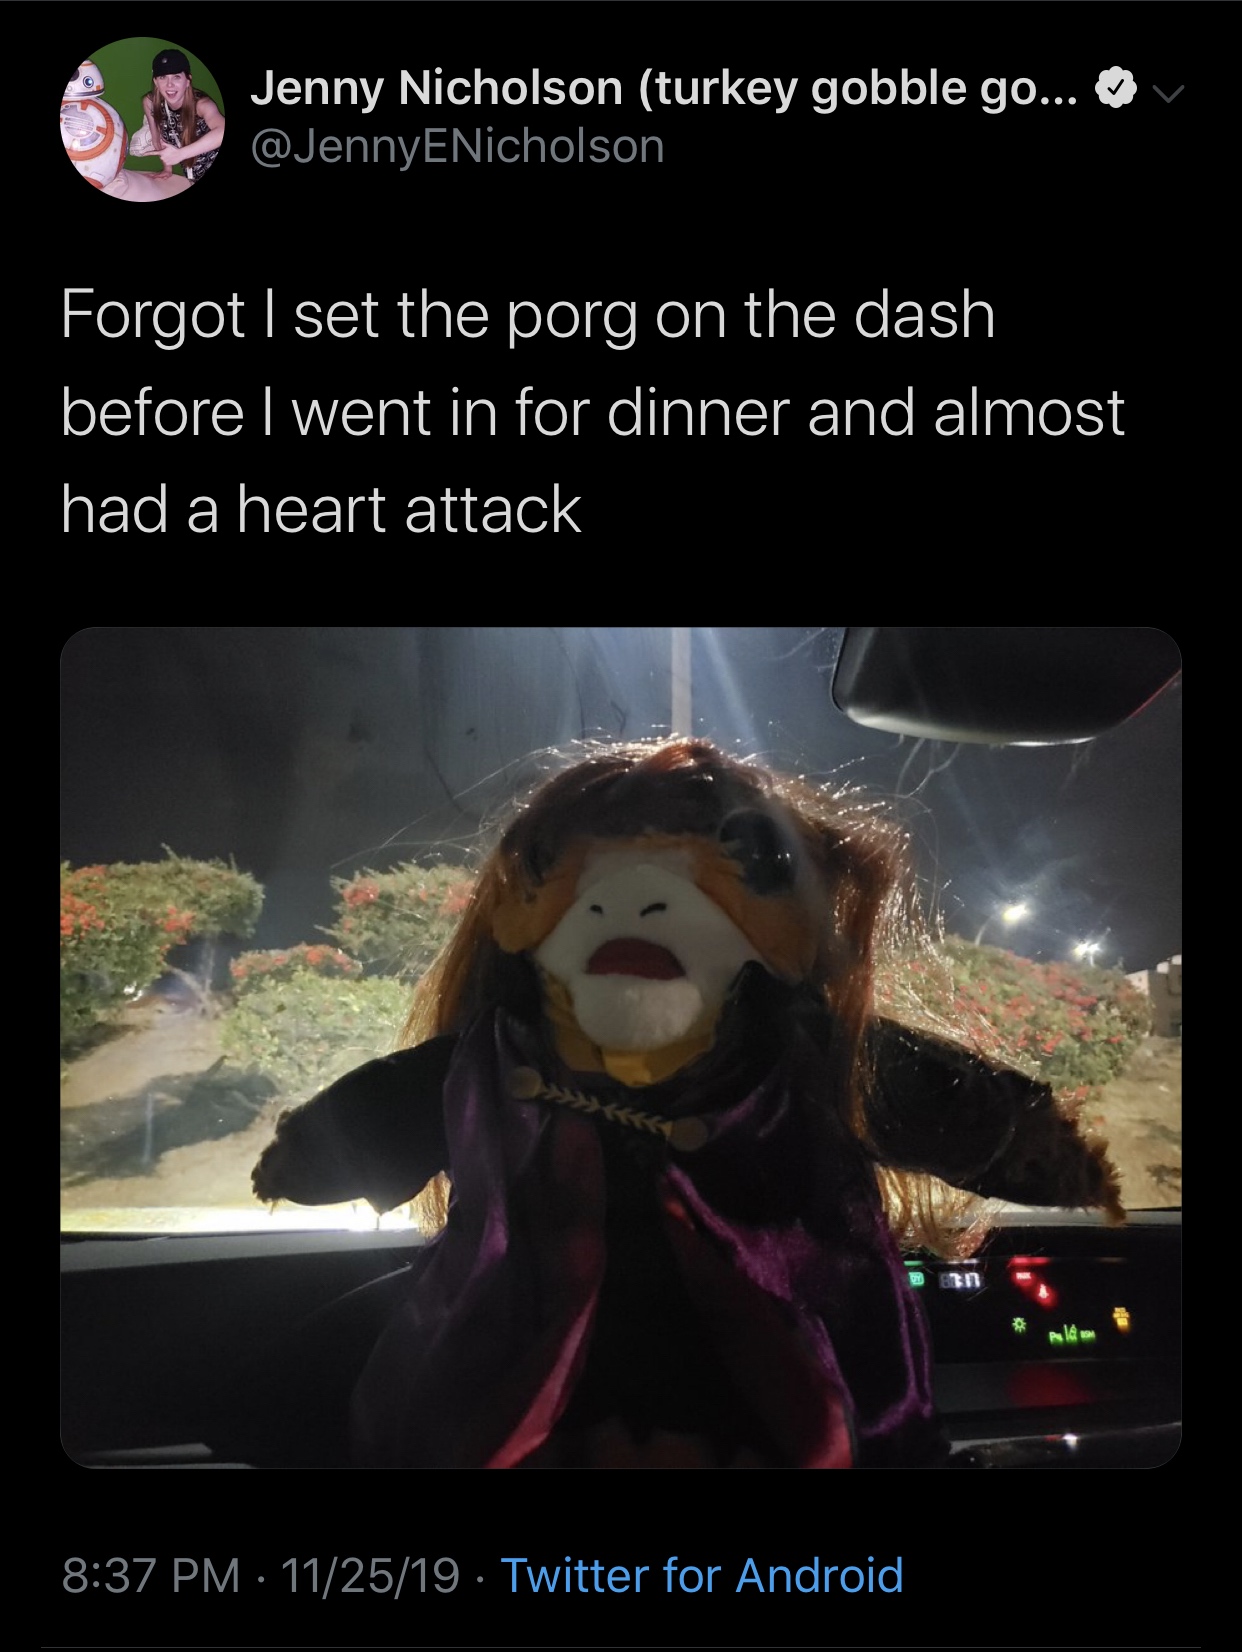 meme - photo caption - Jenny Nicholson turkey gobble go... Forgot I set the porg on the dash before I went in for dinner and almost had a heart attack an Aldo 112519 Twitter for Android